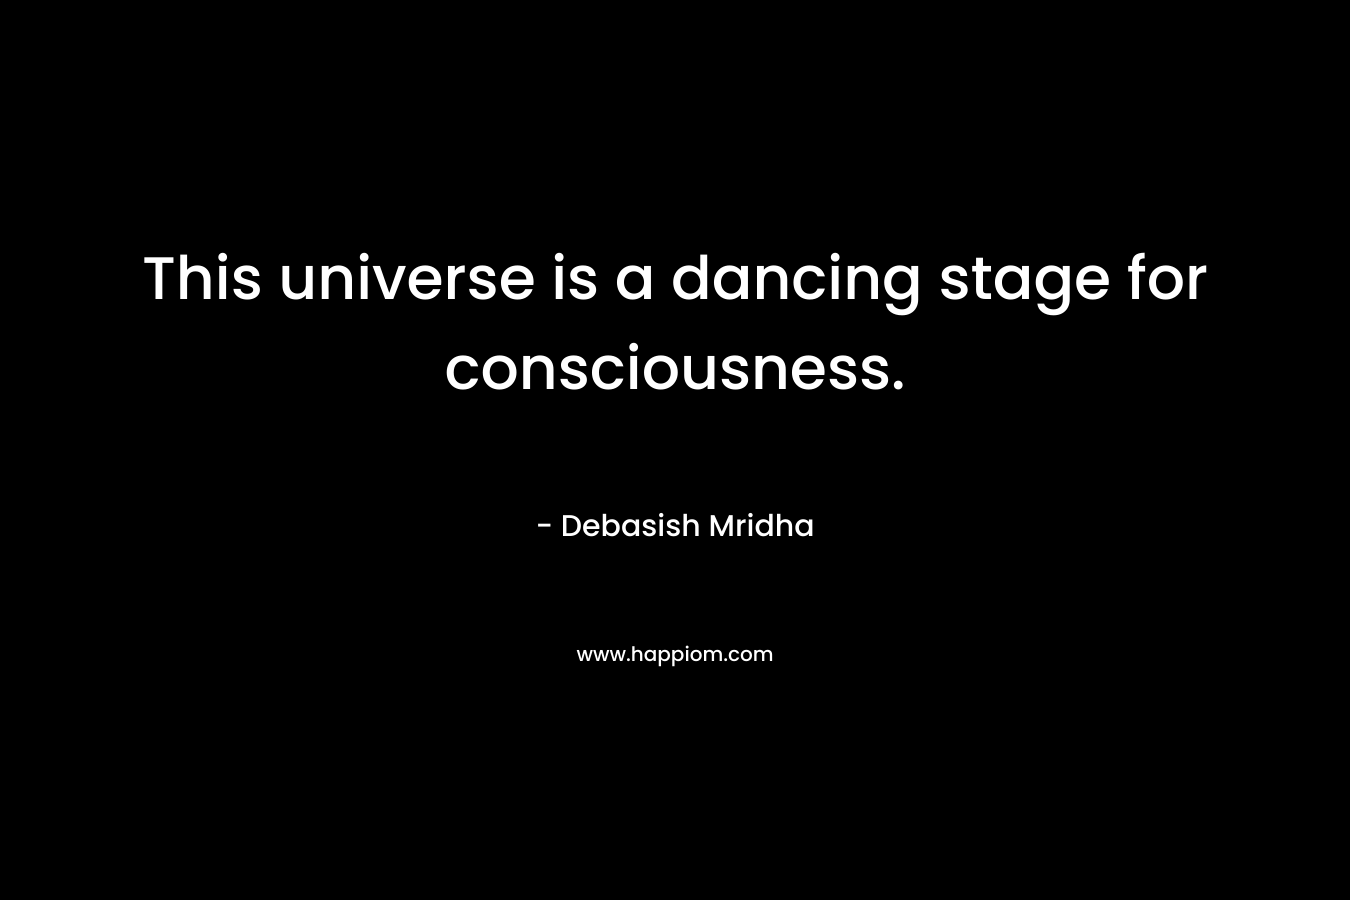 This universe is a dancing stage for consciousness.